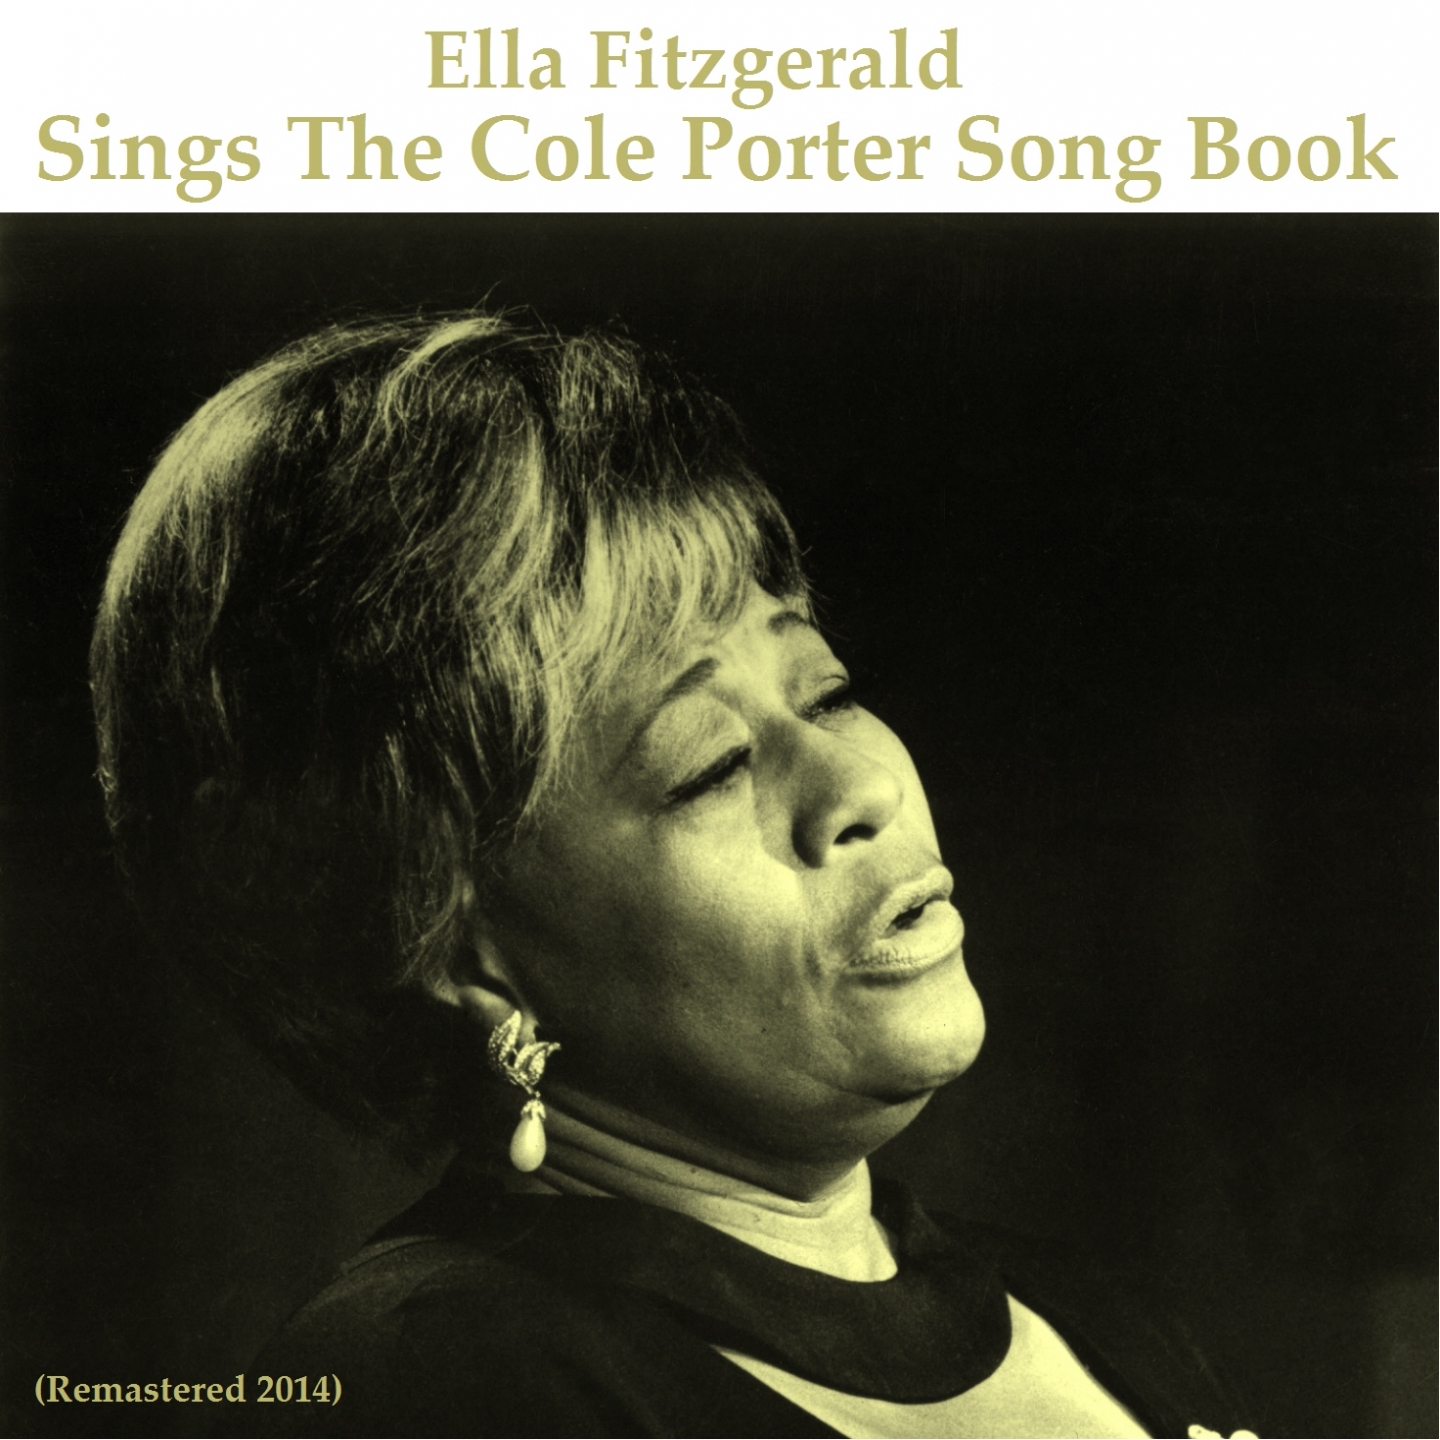 Ella Fitzgerald Sings the Cole Porter Song Book (Remastered 2014)